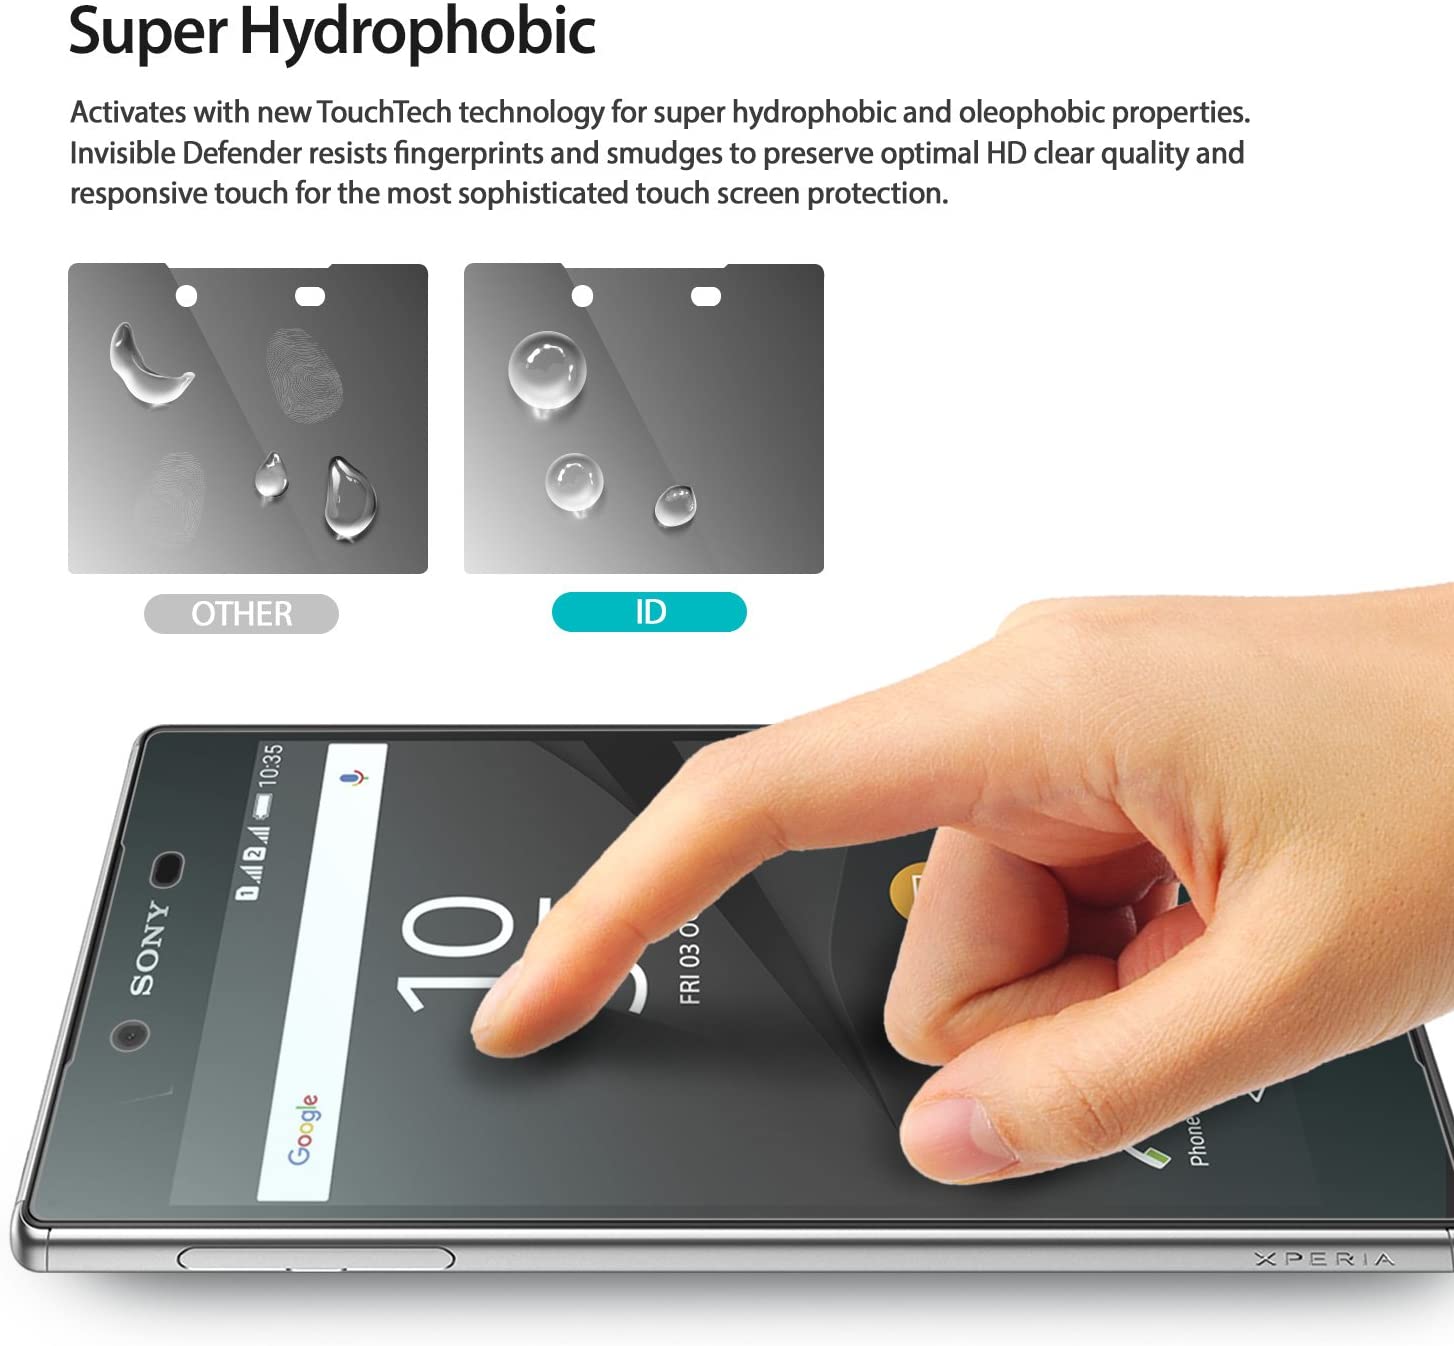 super hydrophobic coating to protect the screen